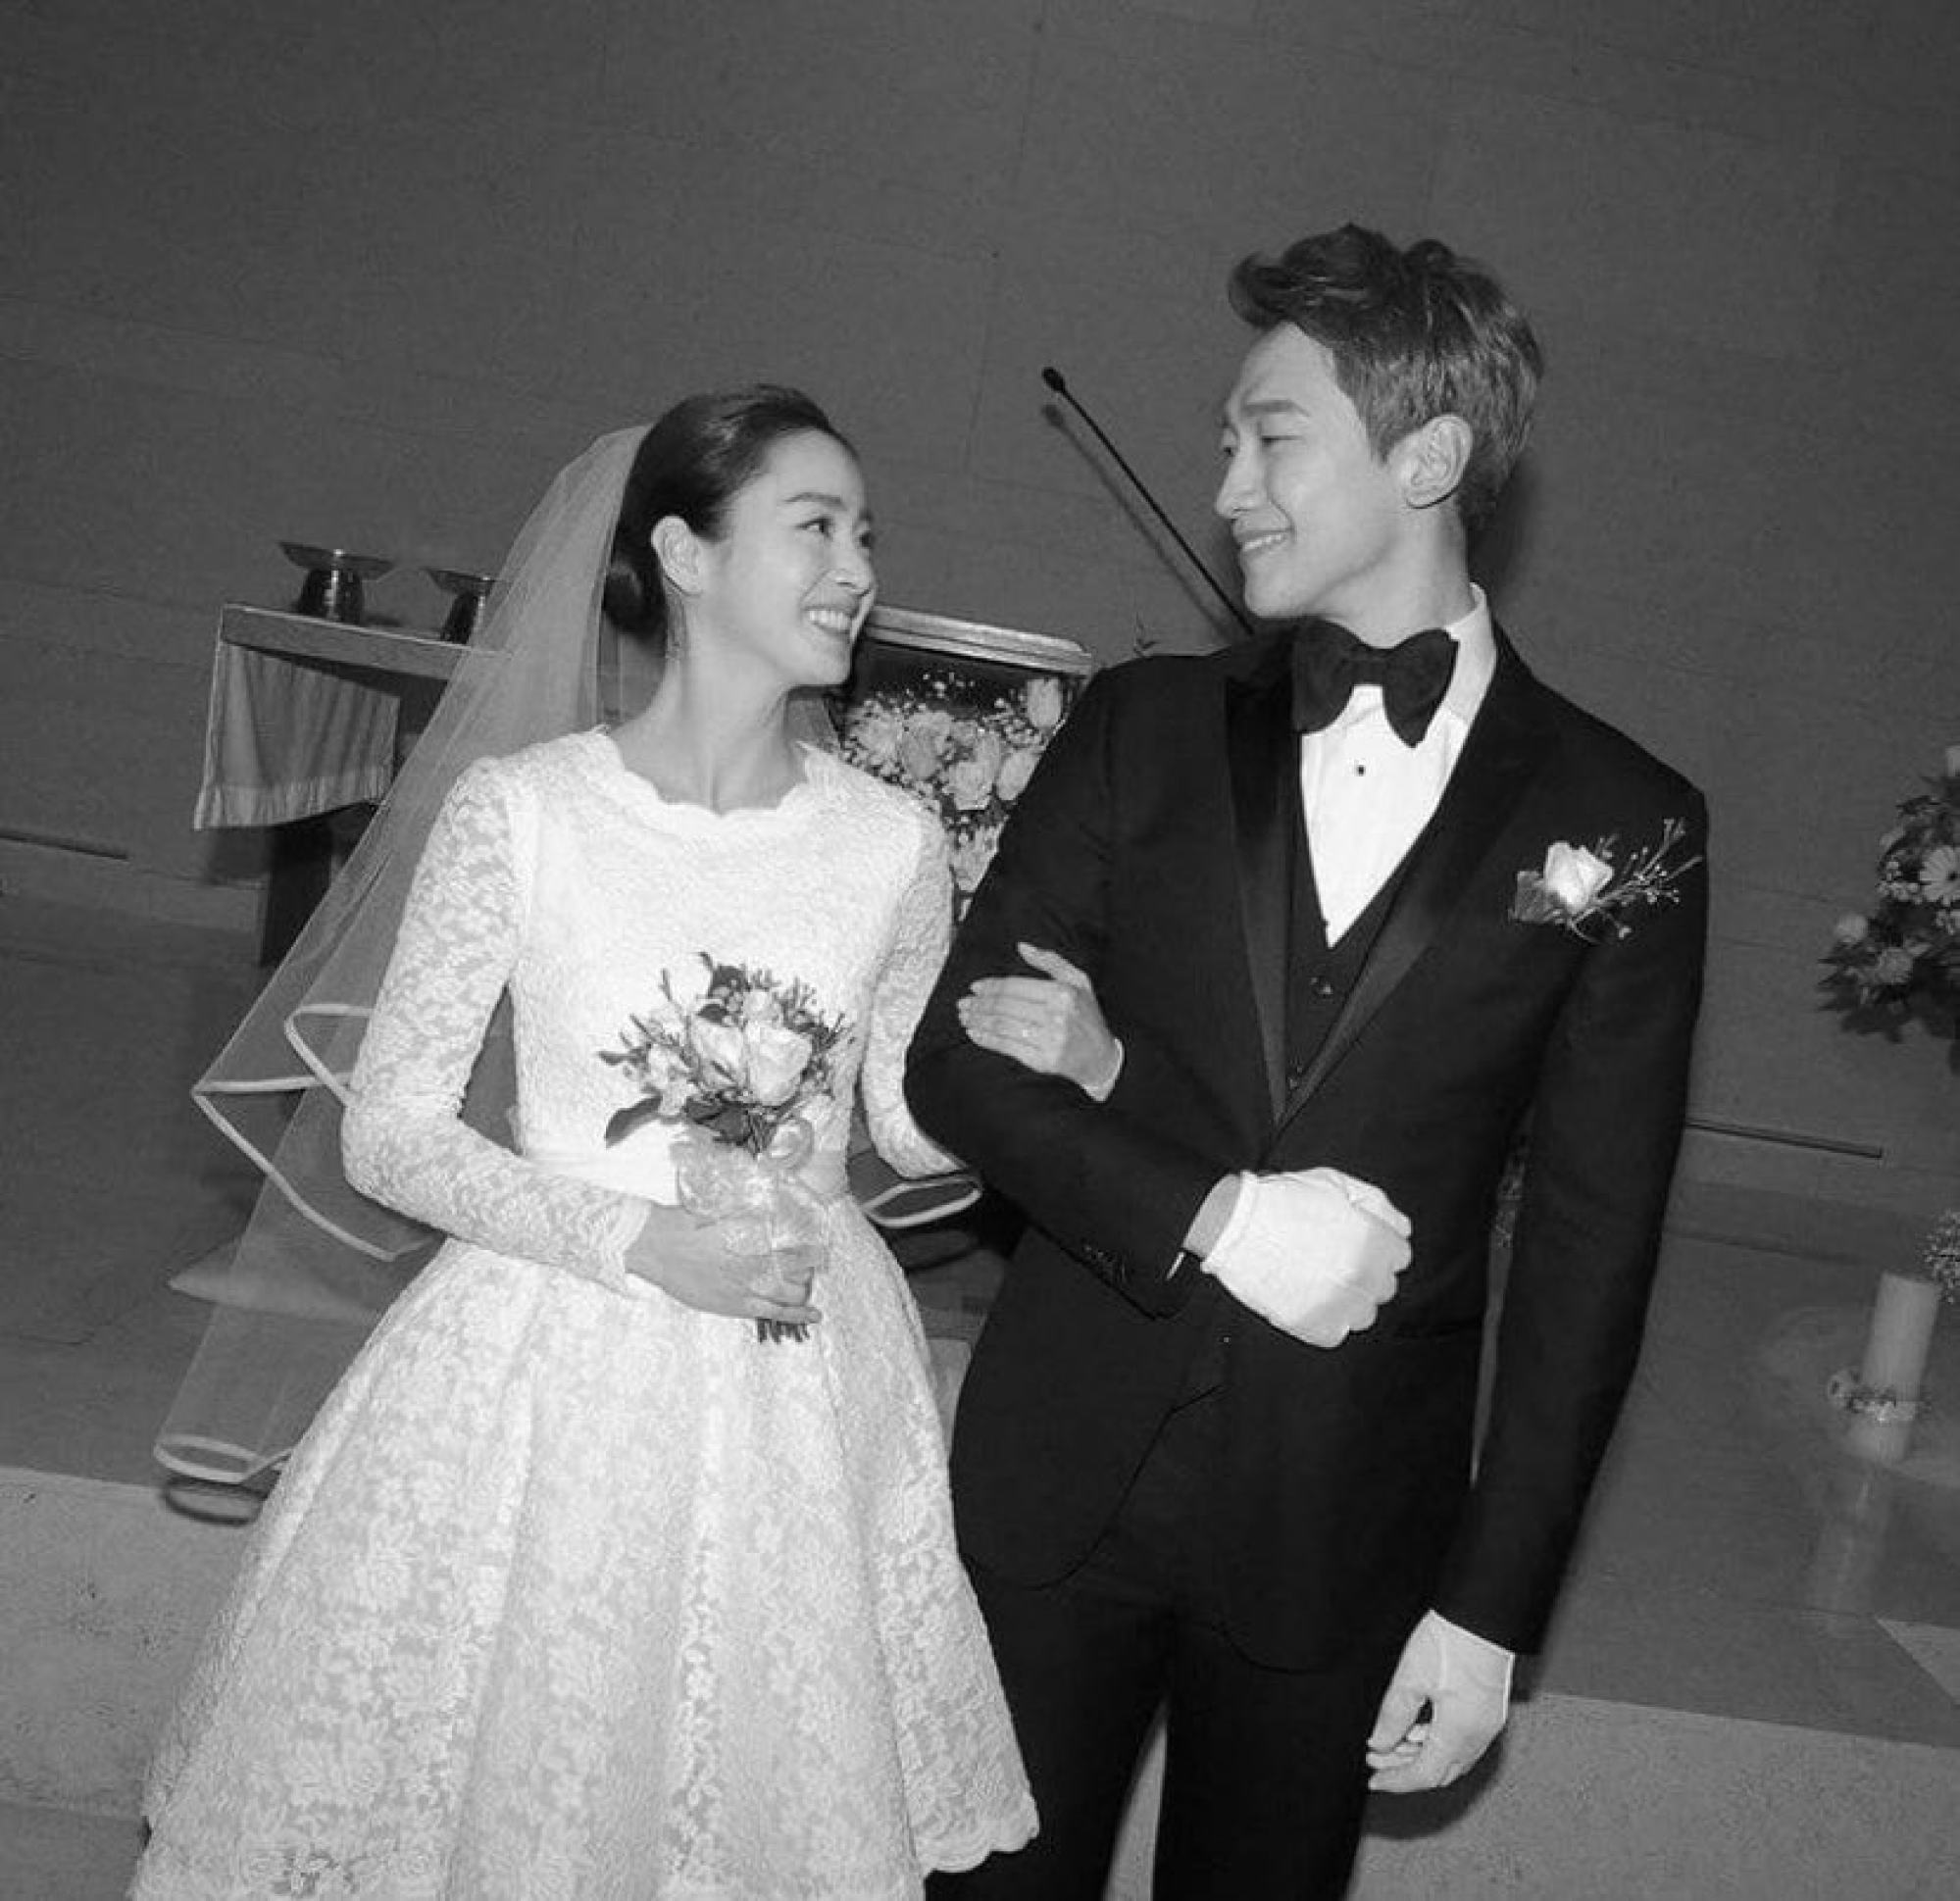 Dior reveals making of Song Hye-kyo's wedding dress